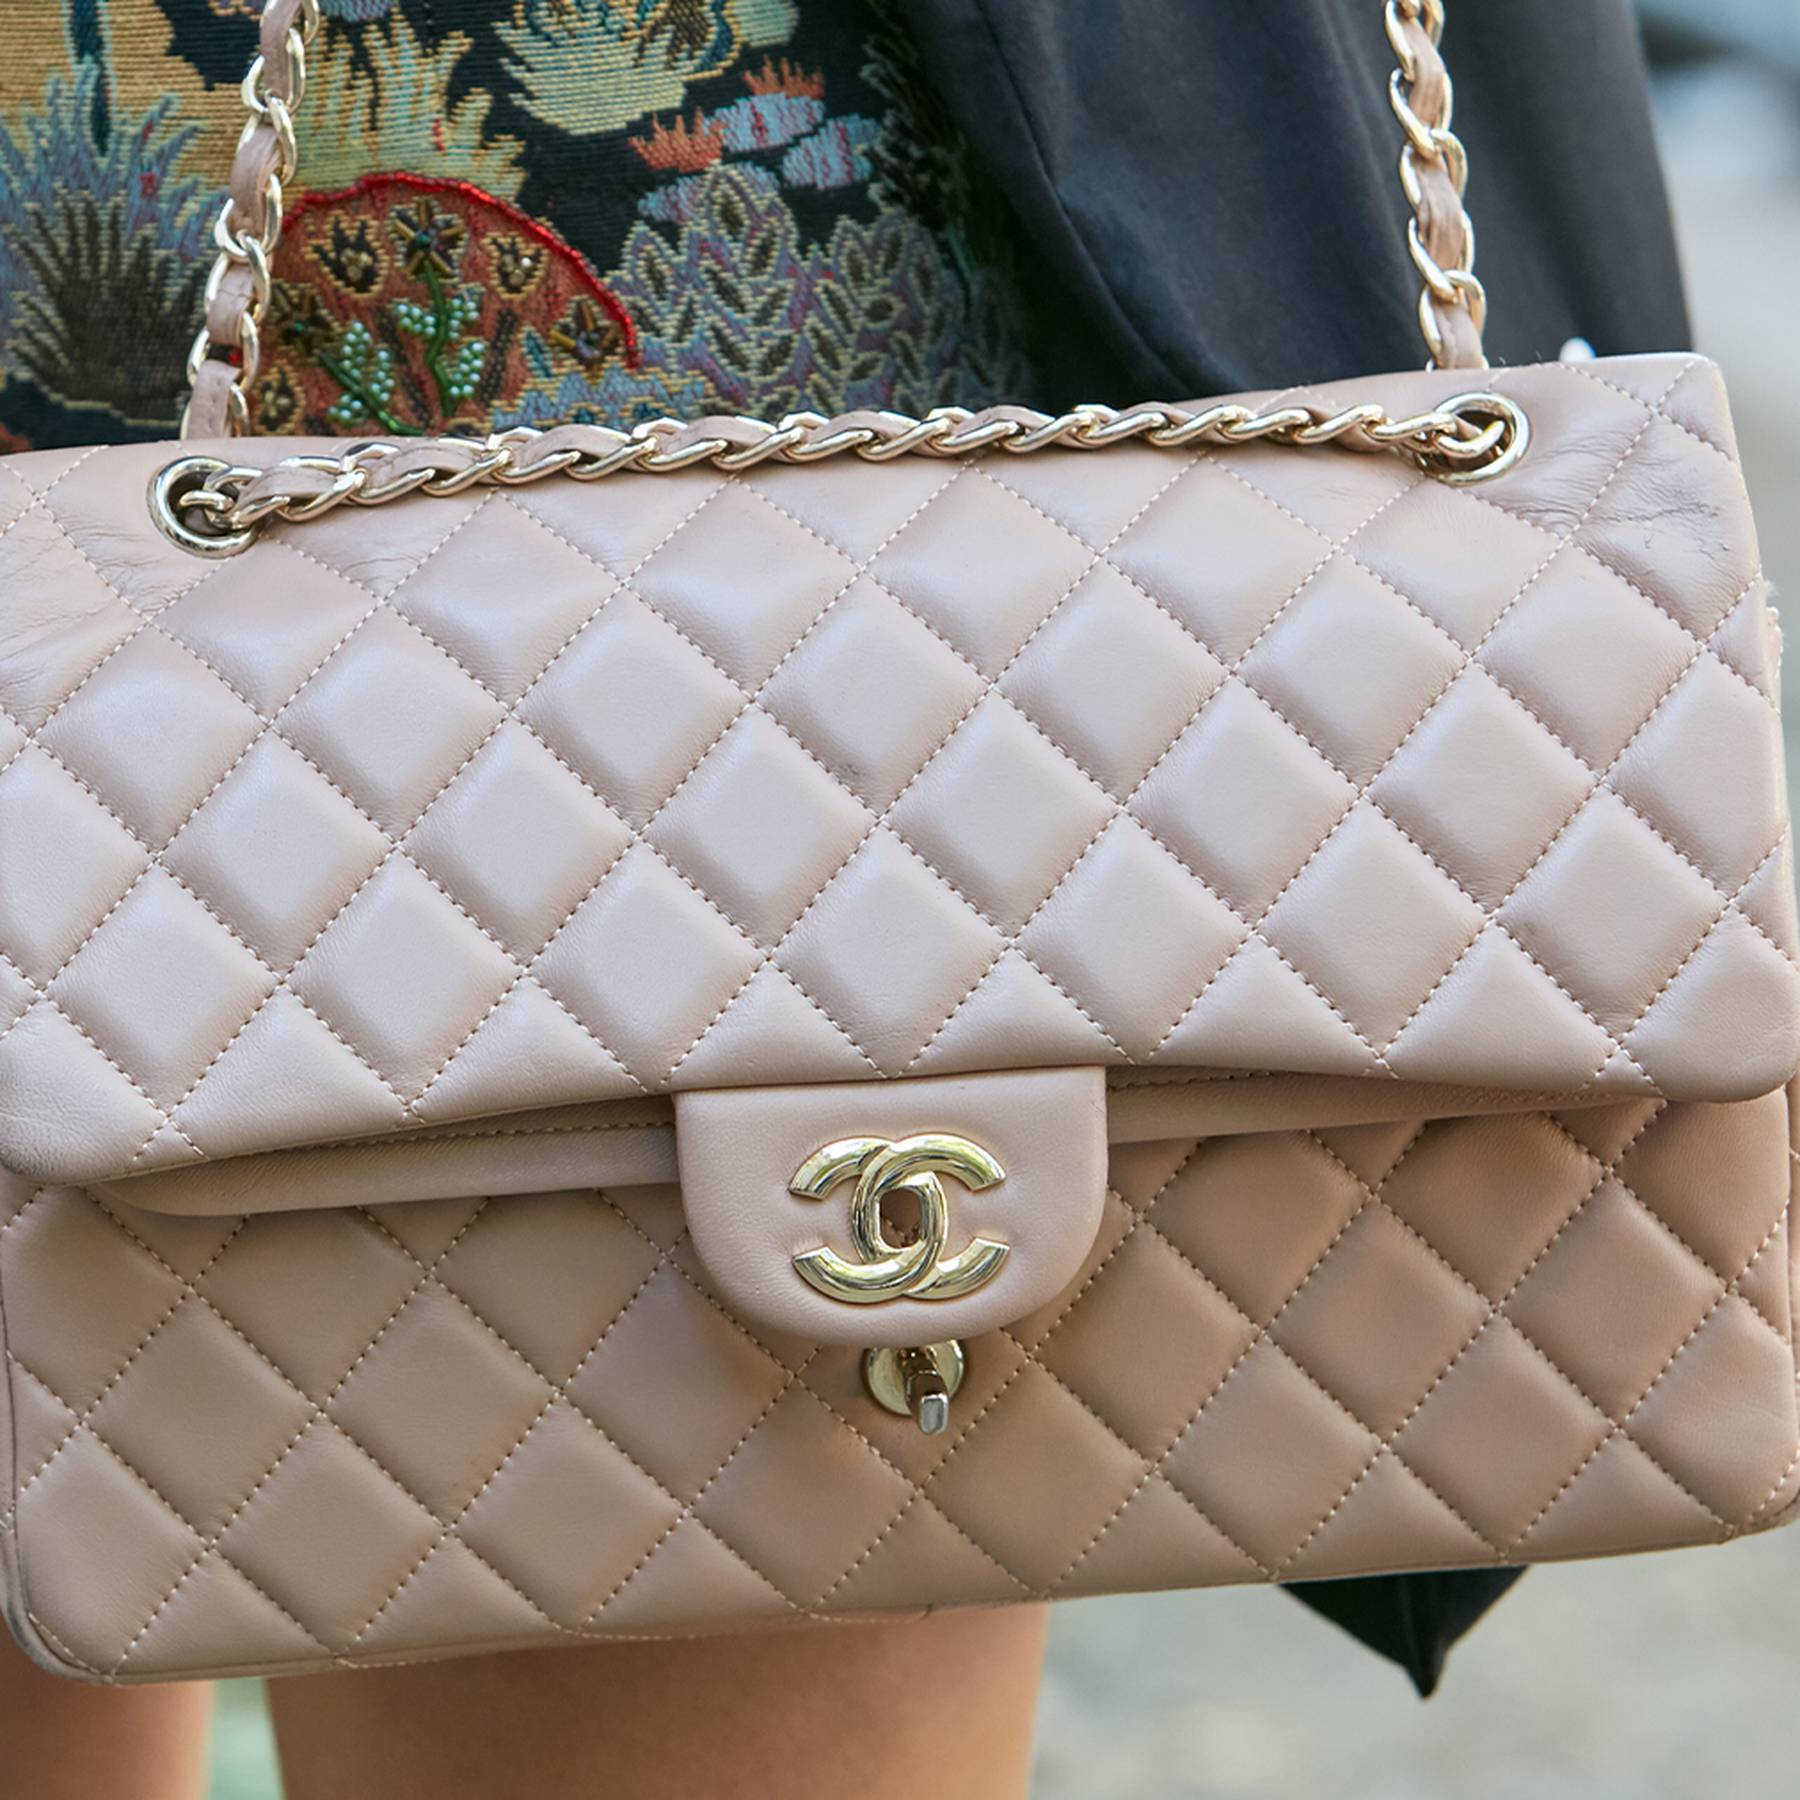 Chanel Restricts Sales to Russians Abroad | BoF